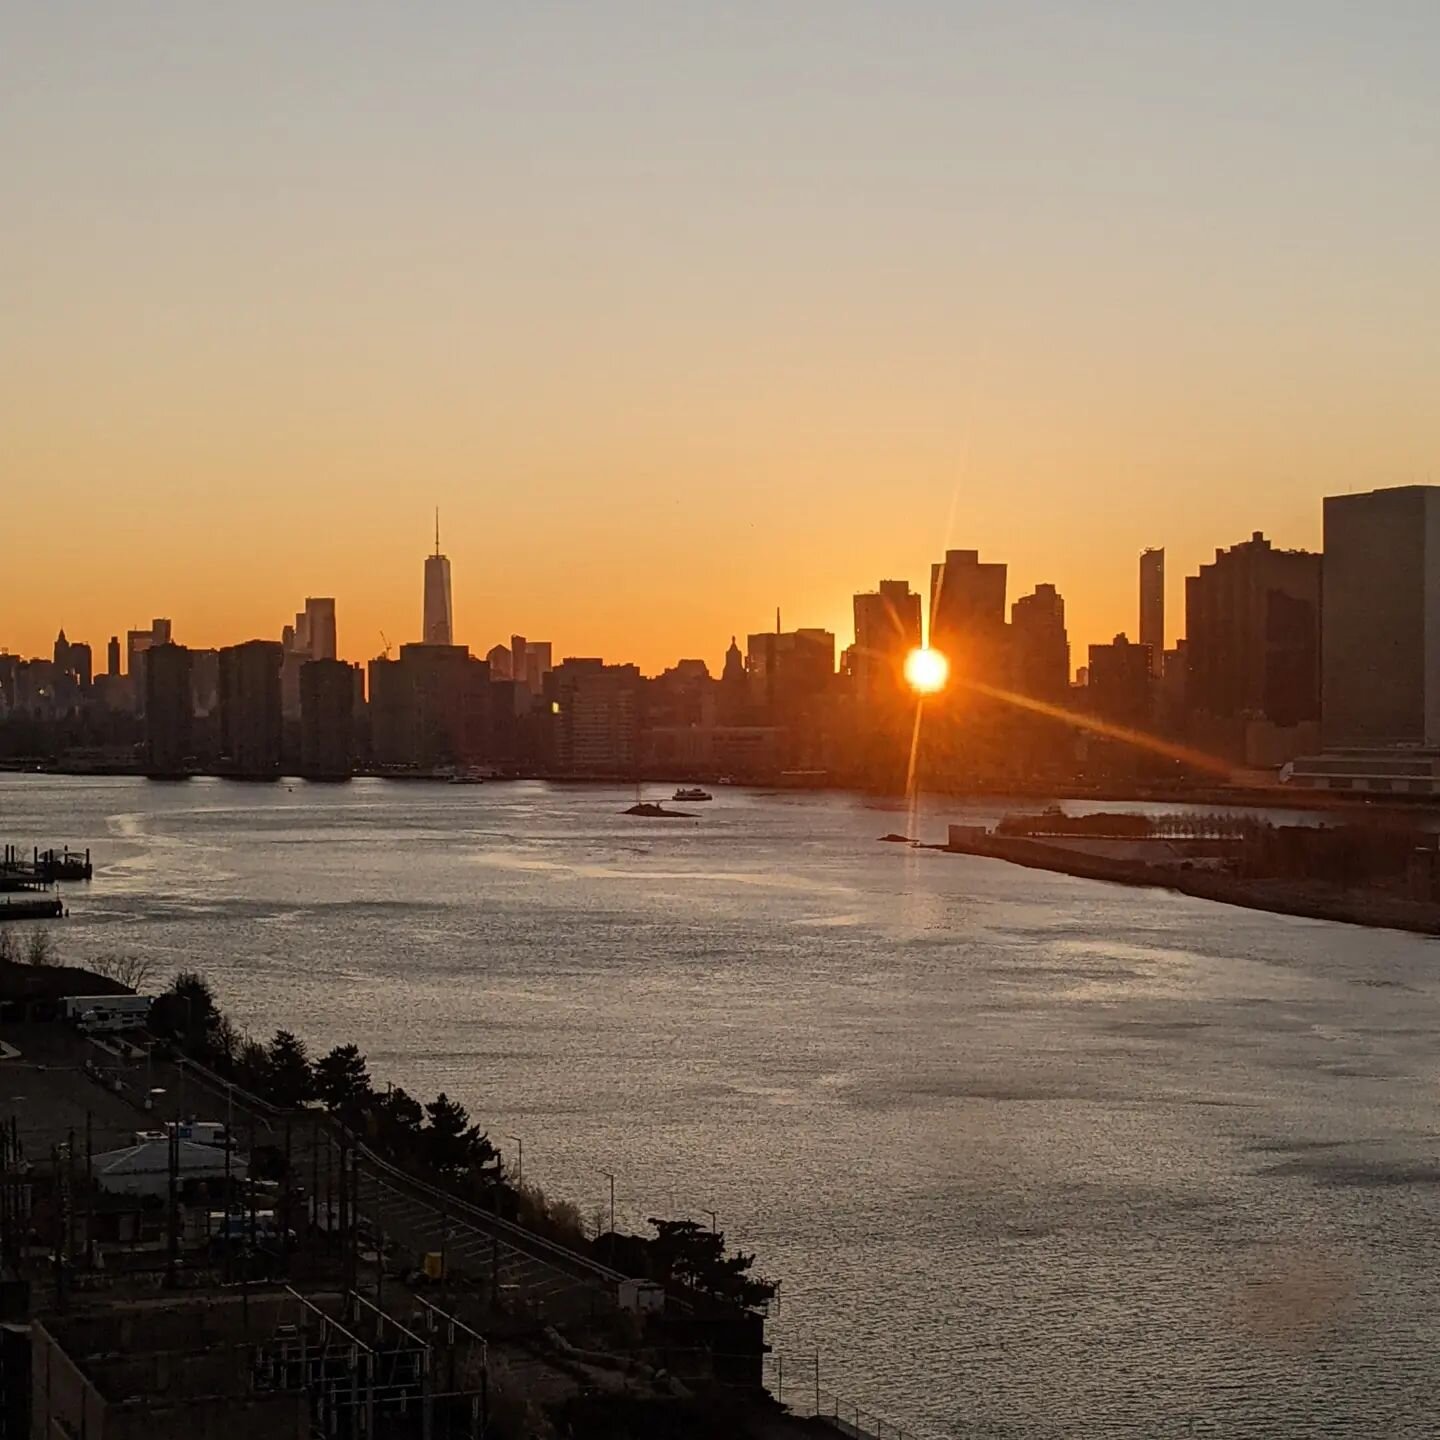 Some views from the Queensboro this past weekend

#nyc #bridge #queensboro #pixel3xl #pixelphotography #timelapse